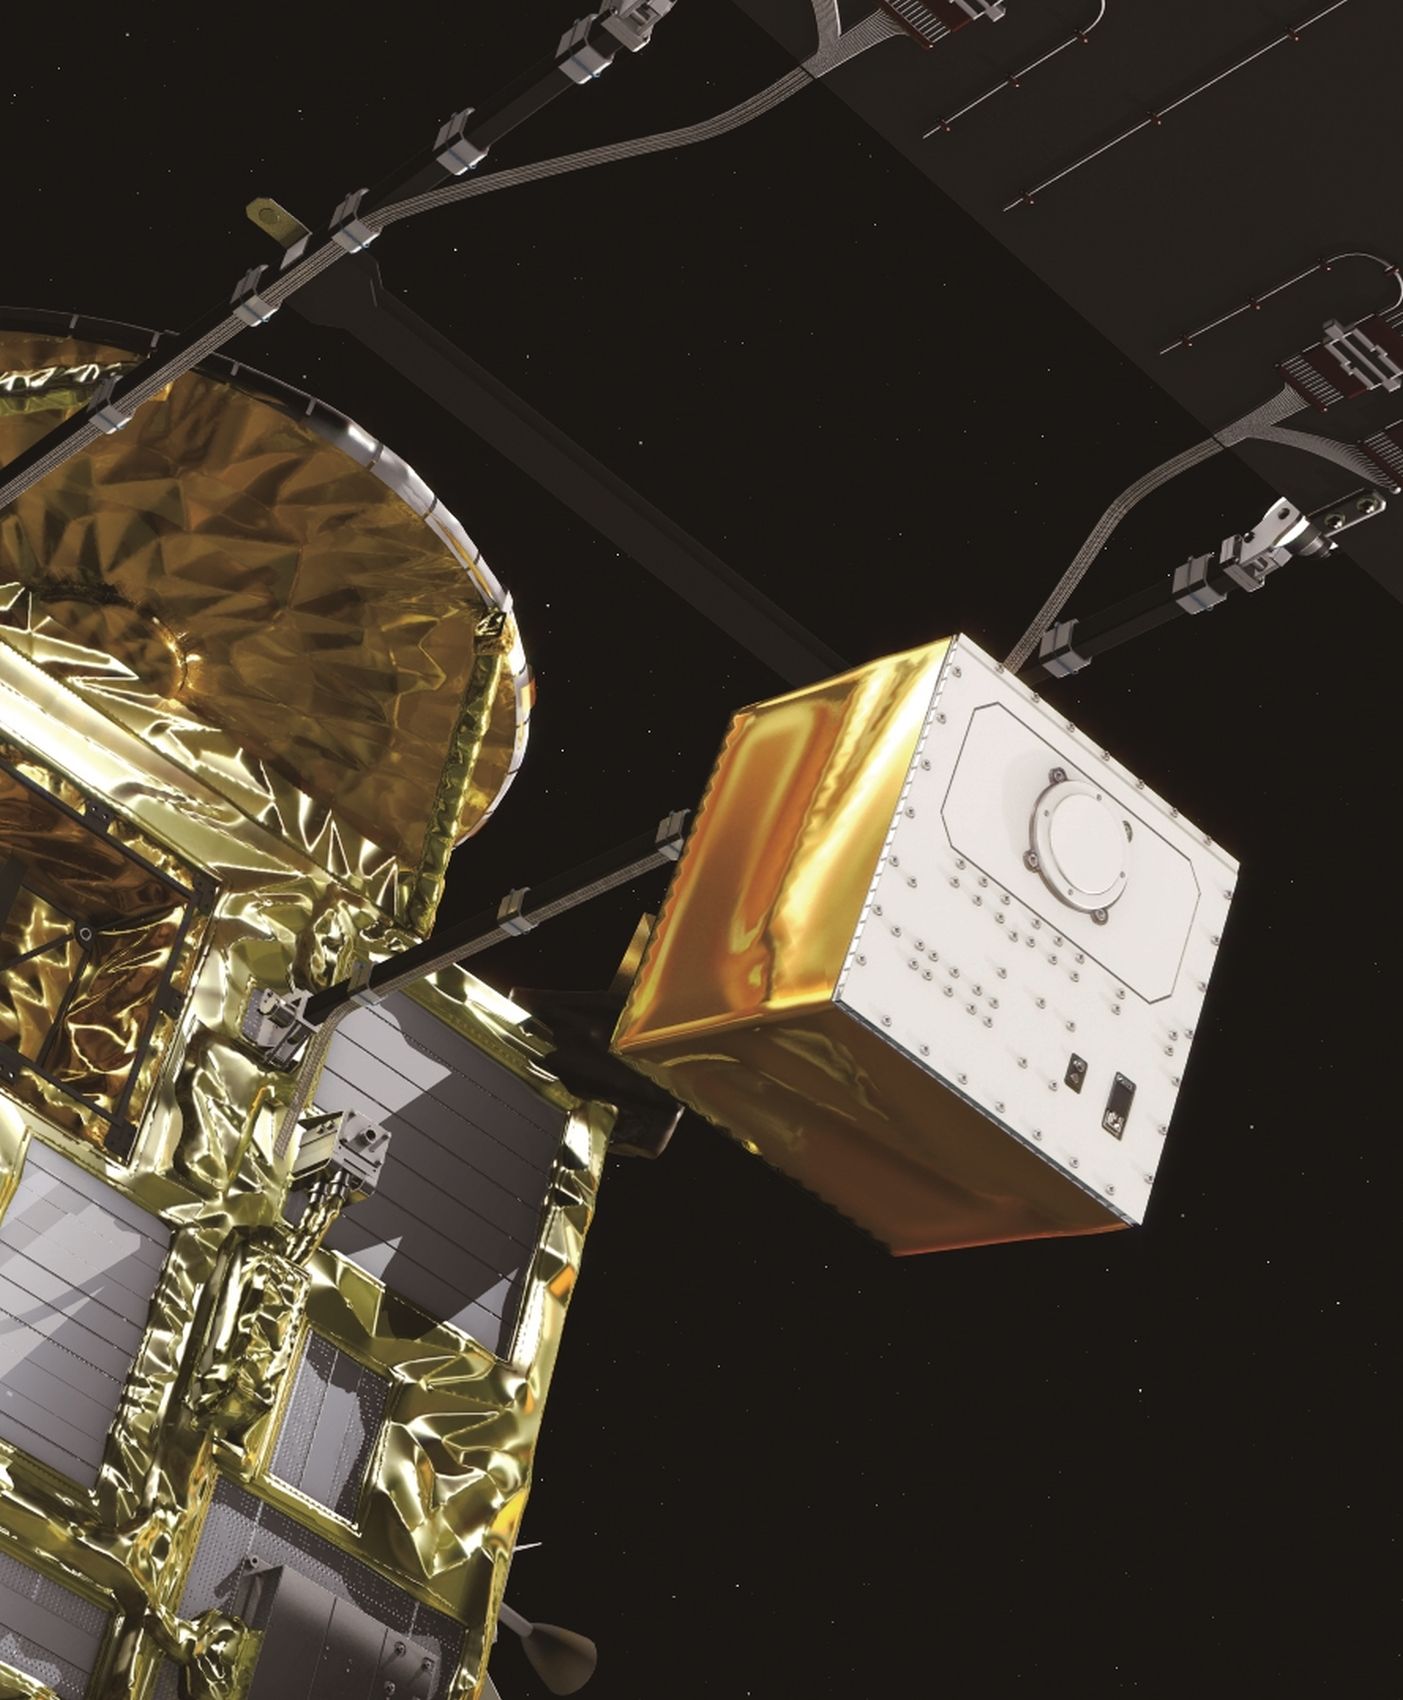 Japan Makes History: Hayabusa2 Spacecraft Lands Rovers on Moving Asteroid